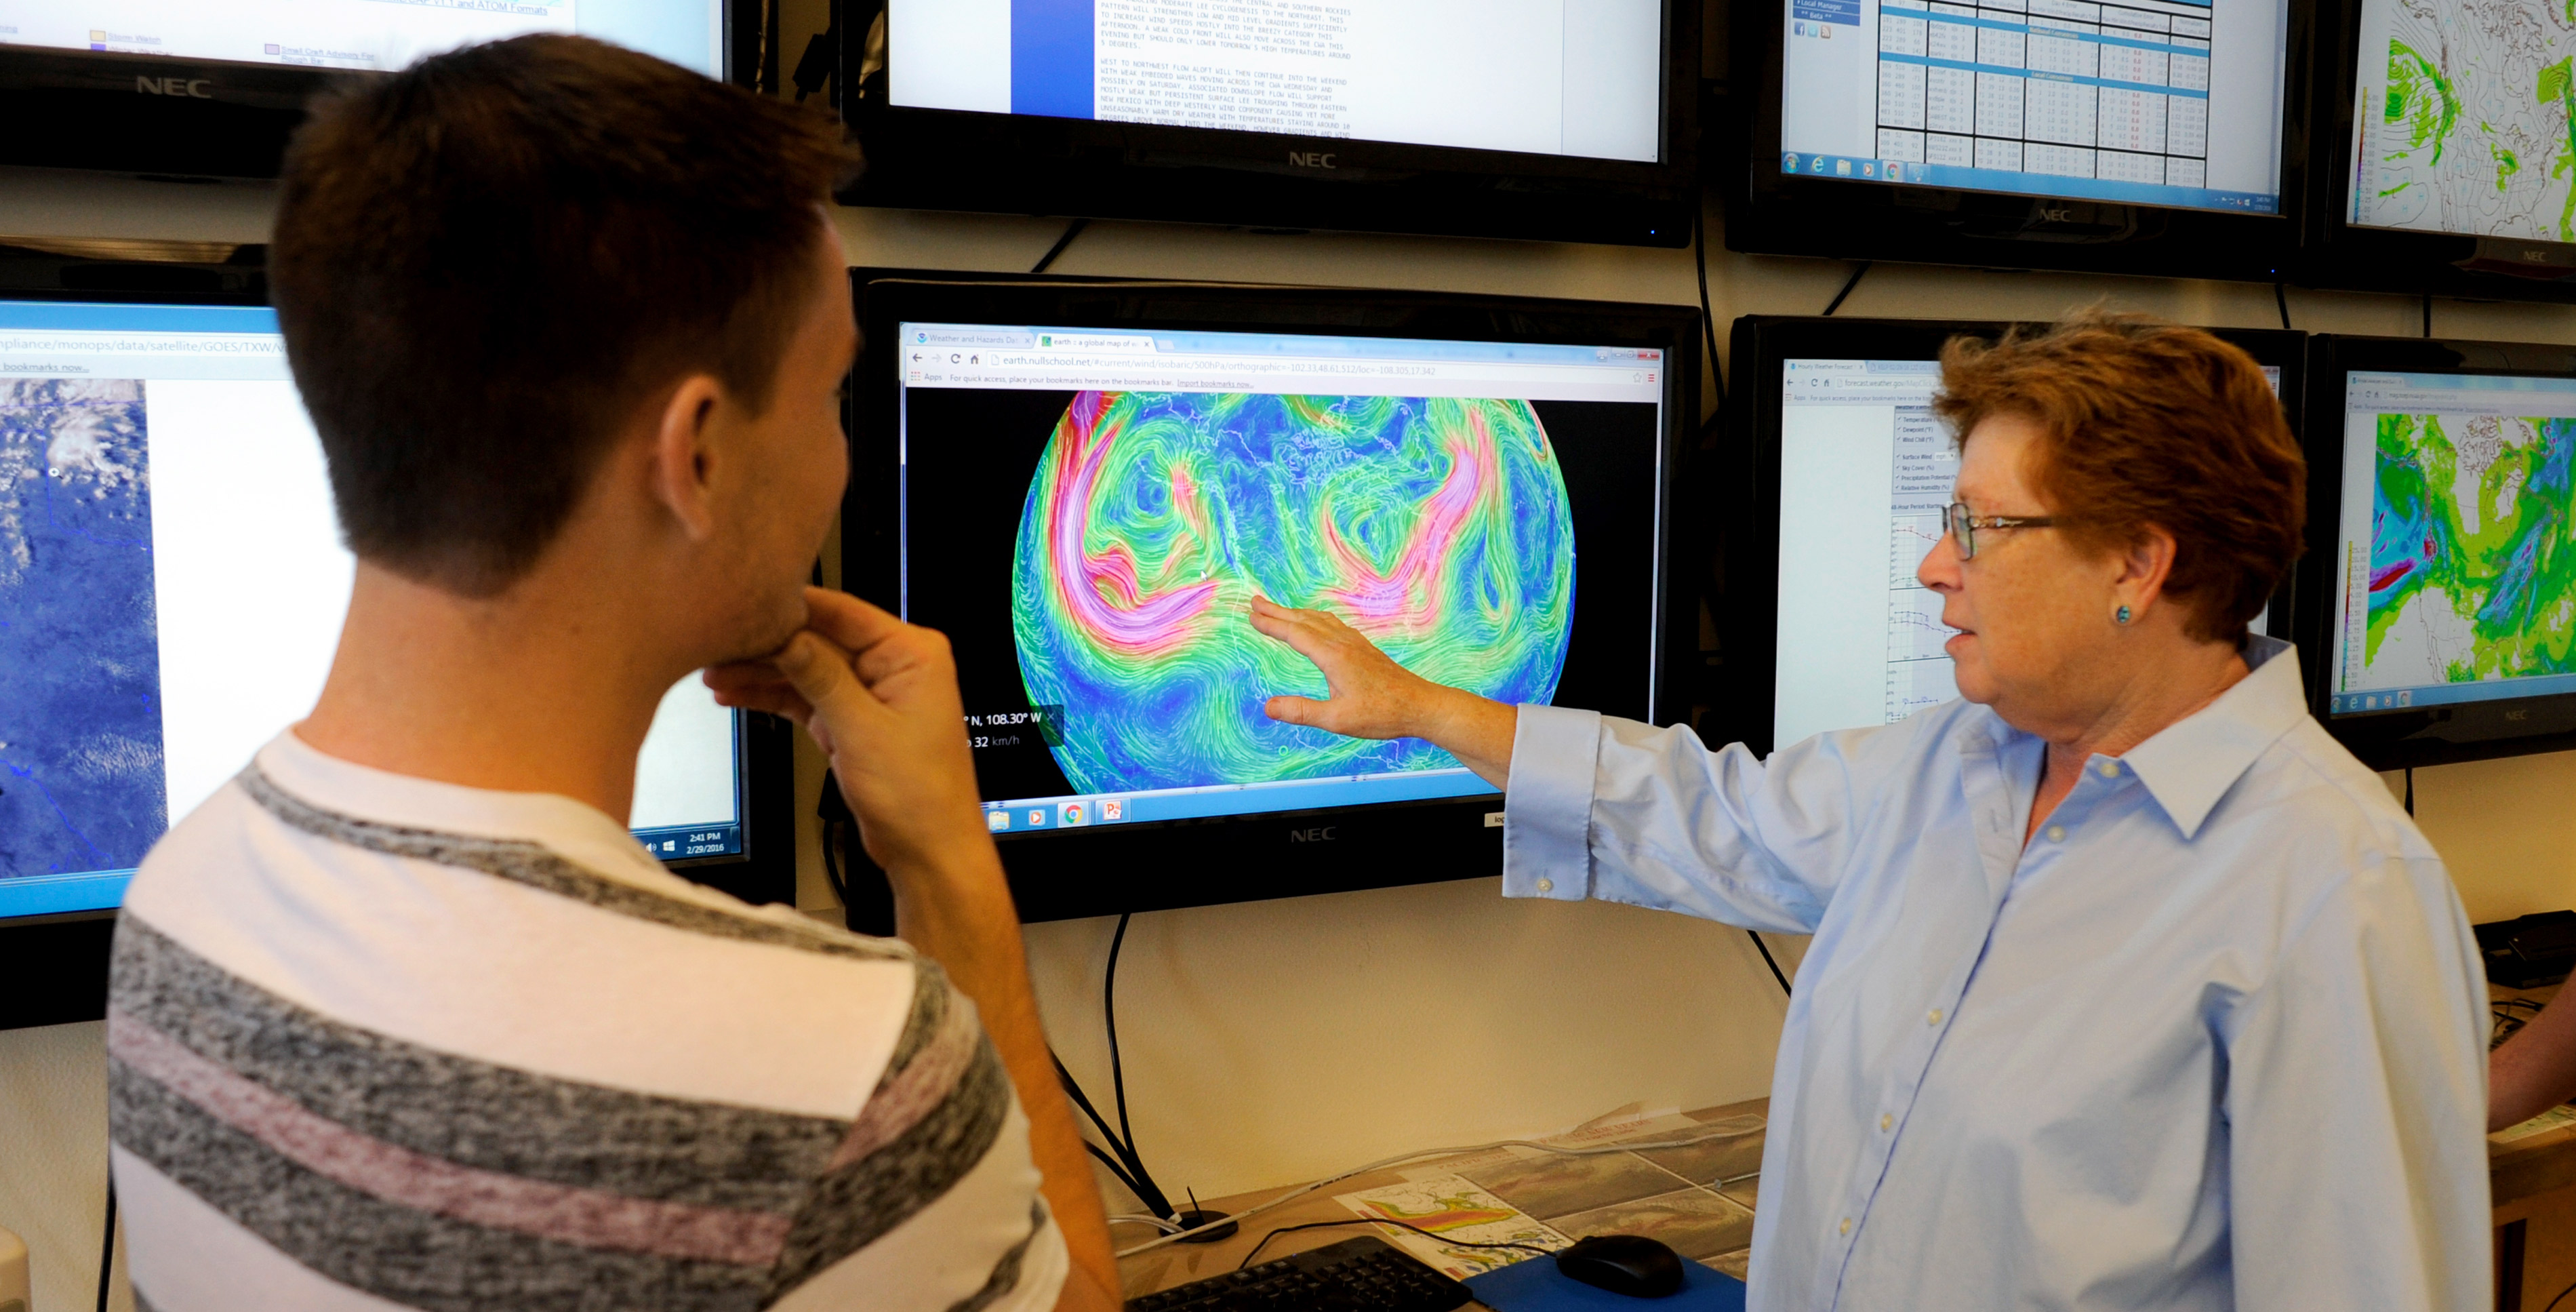 A professor points at the monitor showing weather patterns to a student.